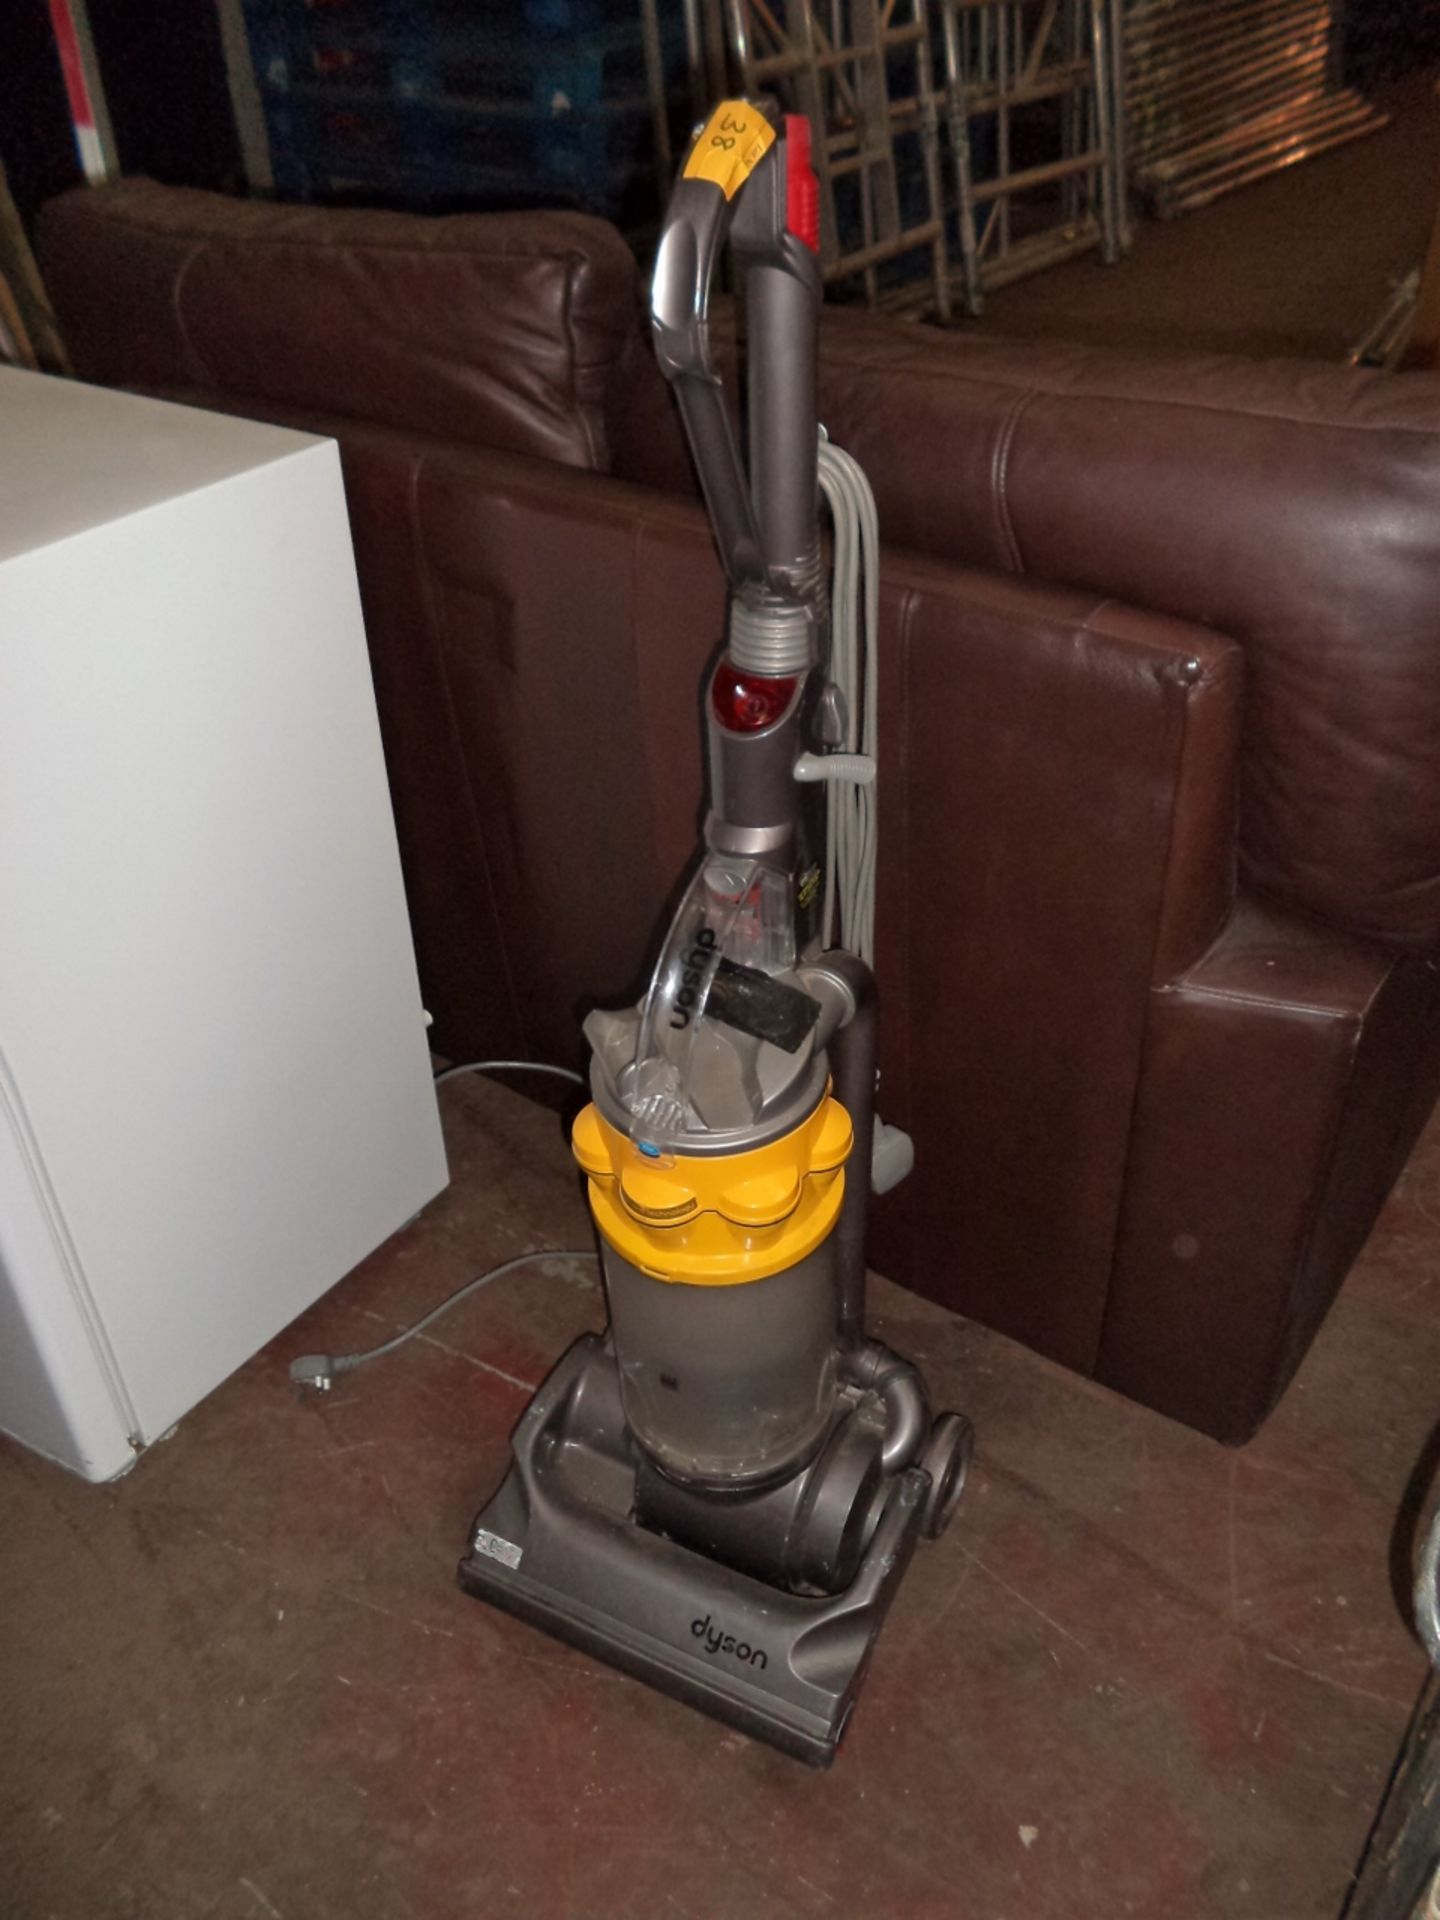 Dyson DC14 bagless vacuum cleaner